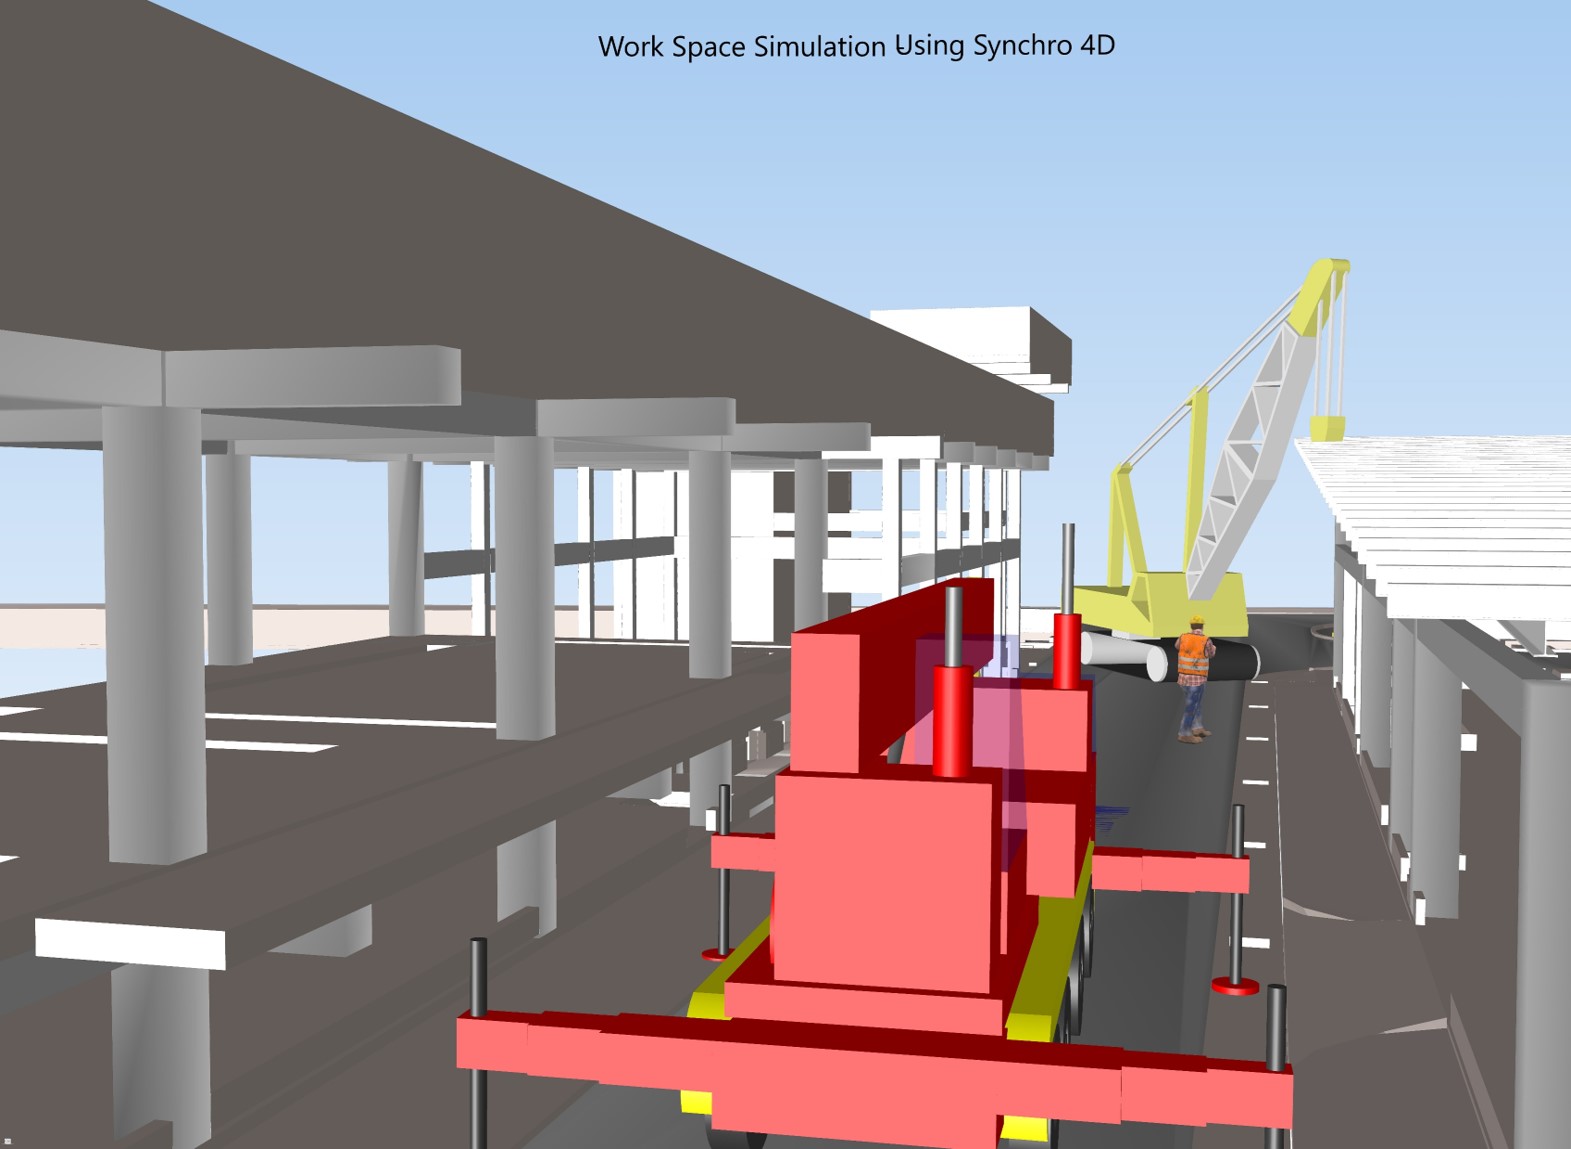 Work Space Simulation using Synchro 4D